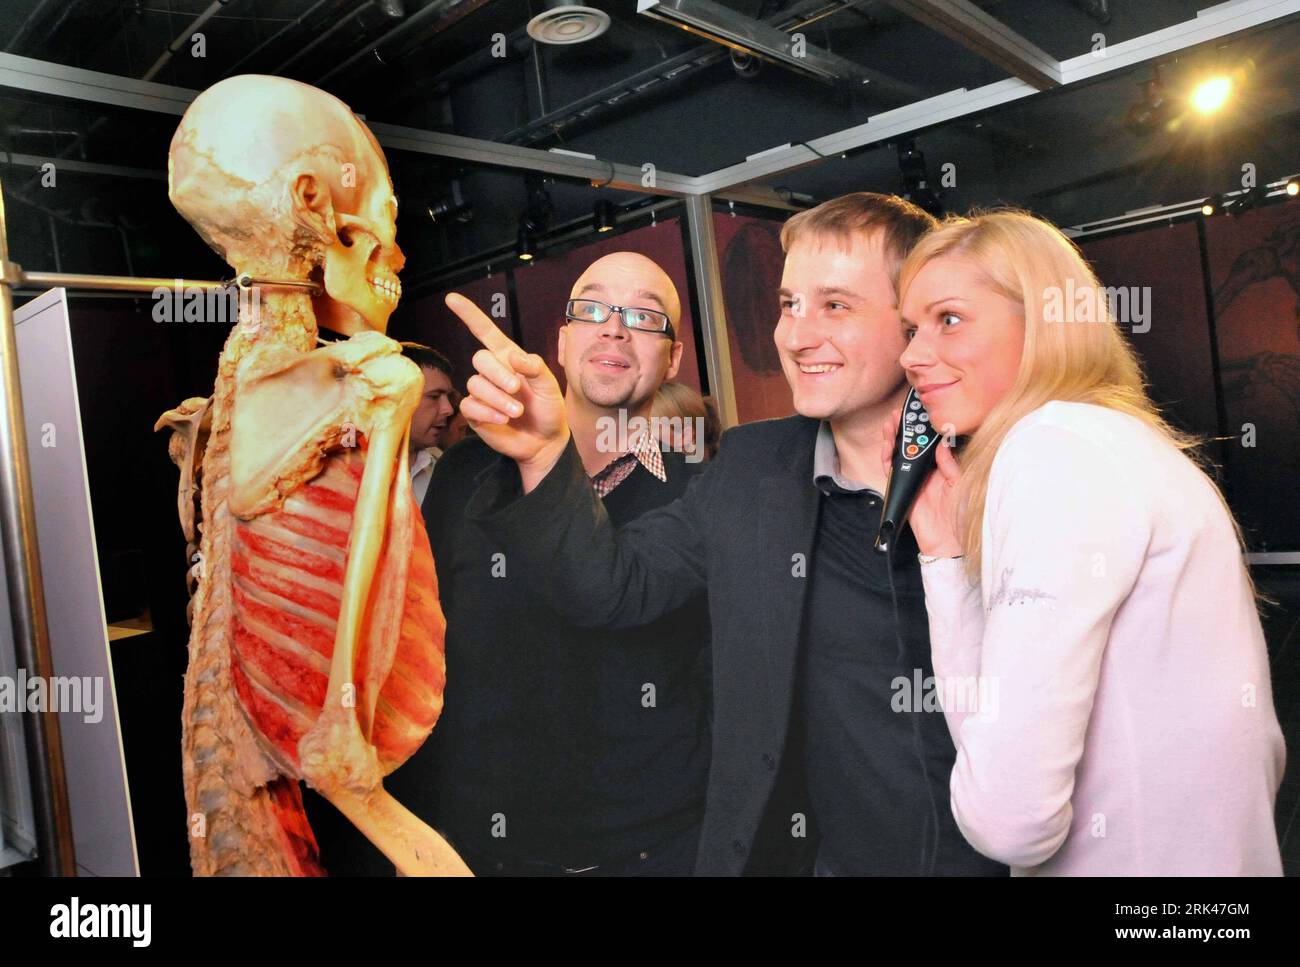 Bildnummer: 53596947  Datum: 12.11.2009  Copyright: imago/Xinhua (091113) -- TALLINN, Nov. 13, 2009 (Xinhua) -- Visitors view at a specimen during the Bodies Revealed exhibition in Tallinn, capital of Estonia, Nov. 12, 2009. Some 14 full body specimens and over 200 organs are displayed during the exhibition to reveal the miraculous systems of the human bodies. (Xinhua/Viktor Vesterinen) (lyi) (2)ESTONIA-TALLINN-BODIES REVEALED EXHIBITION PUBLICATIONxNOTxINxCHN Ausstellung kbdig xcb 2009 quer o0 Anatomie  Skelett    Bildnummer 53596947 Date 12 11 2009 Copyright Imago XINHUA  Tallinn Nov 13 2009 Stock Photo